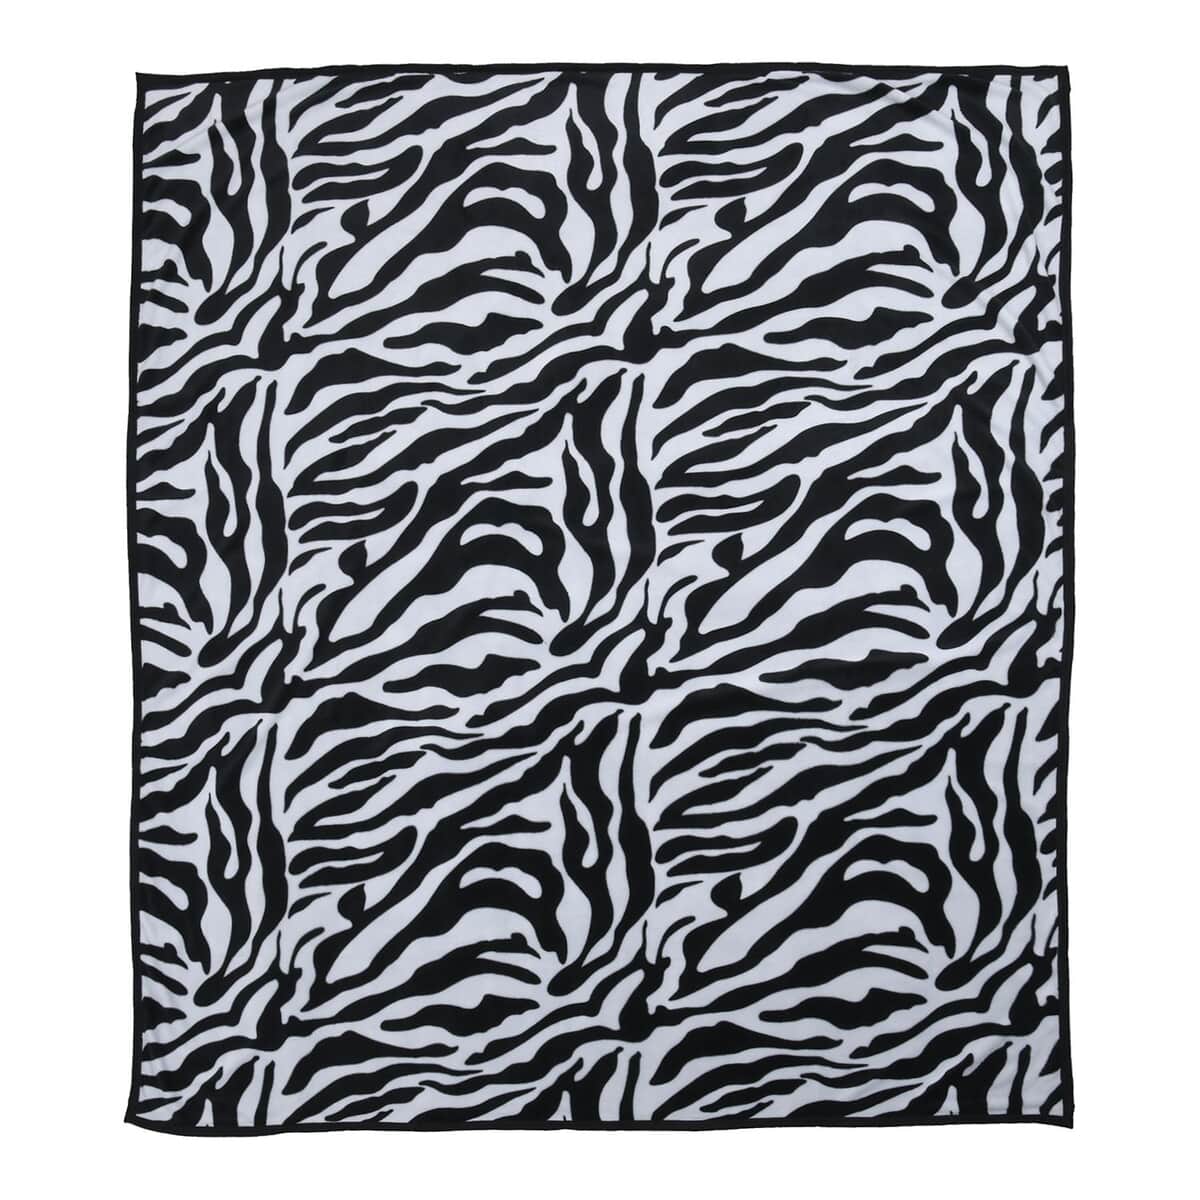 Homesmart Black & White Color Zebra Stripe Pattern Microfiber Coral Fleece Blanket (59.05x78.74) with 2 Cushion Covers image number 2